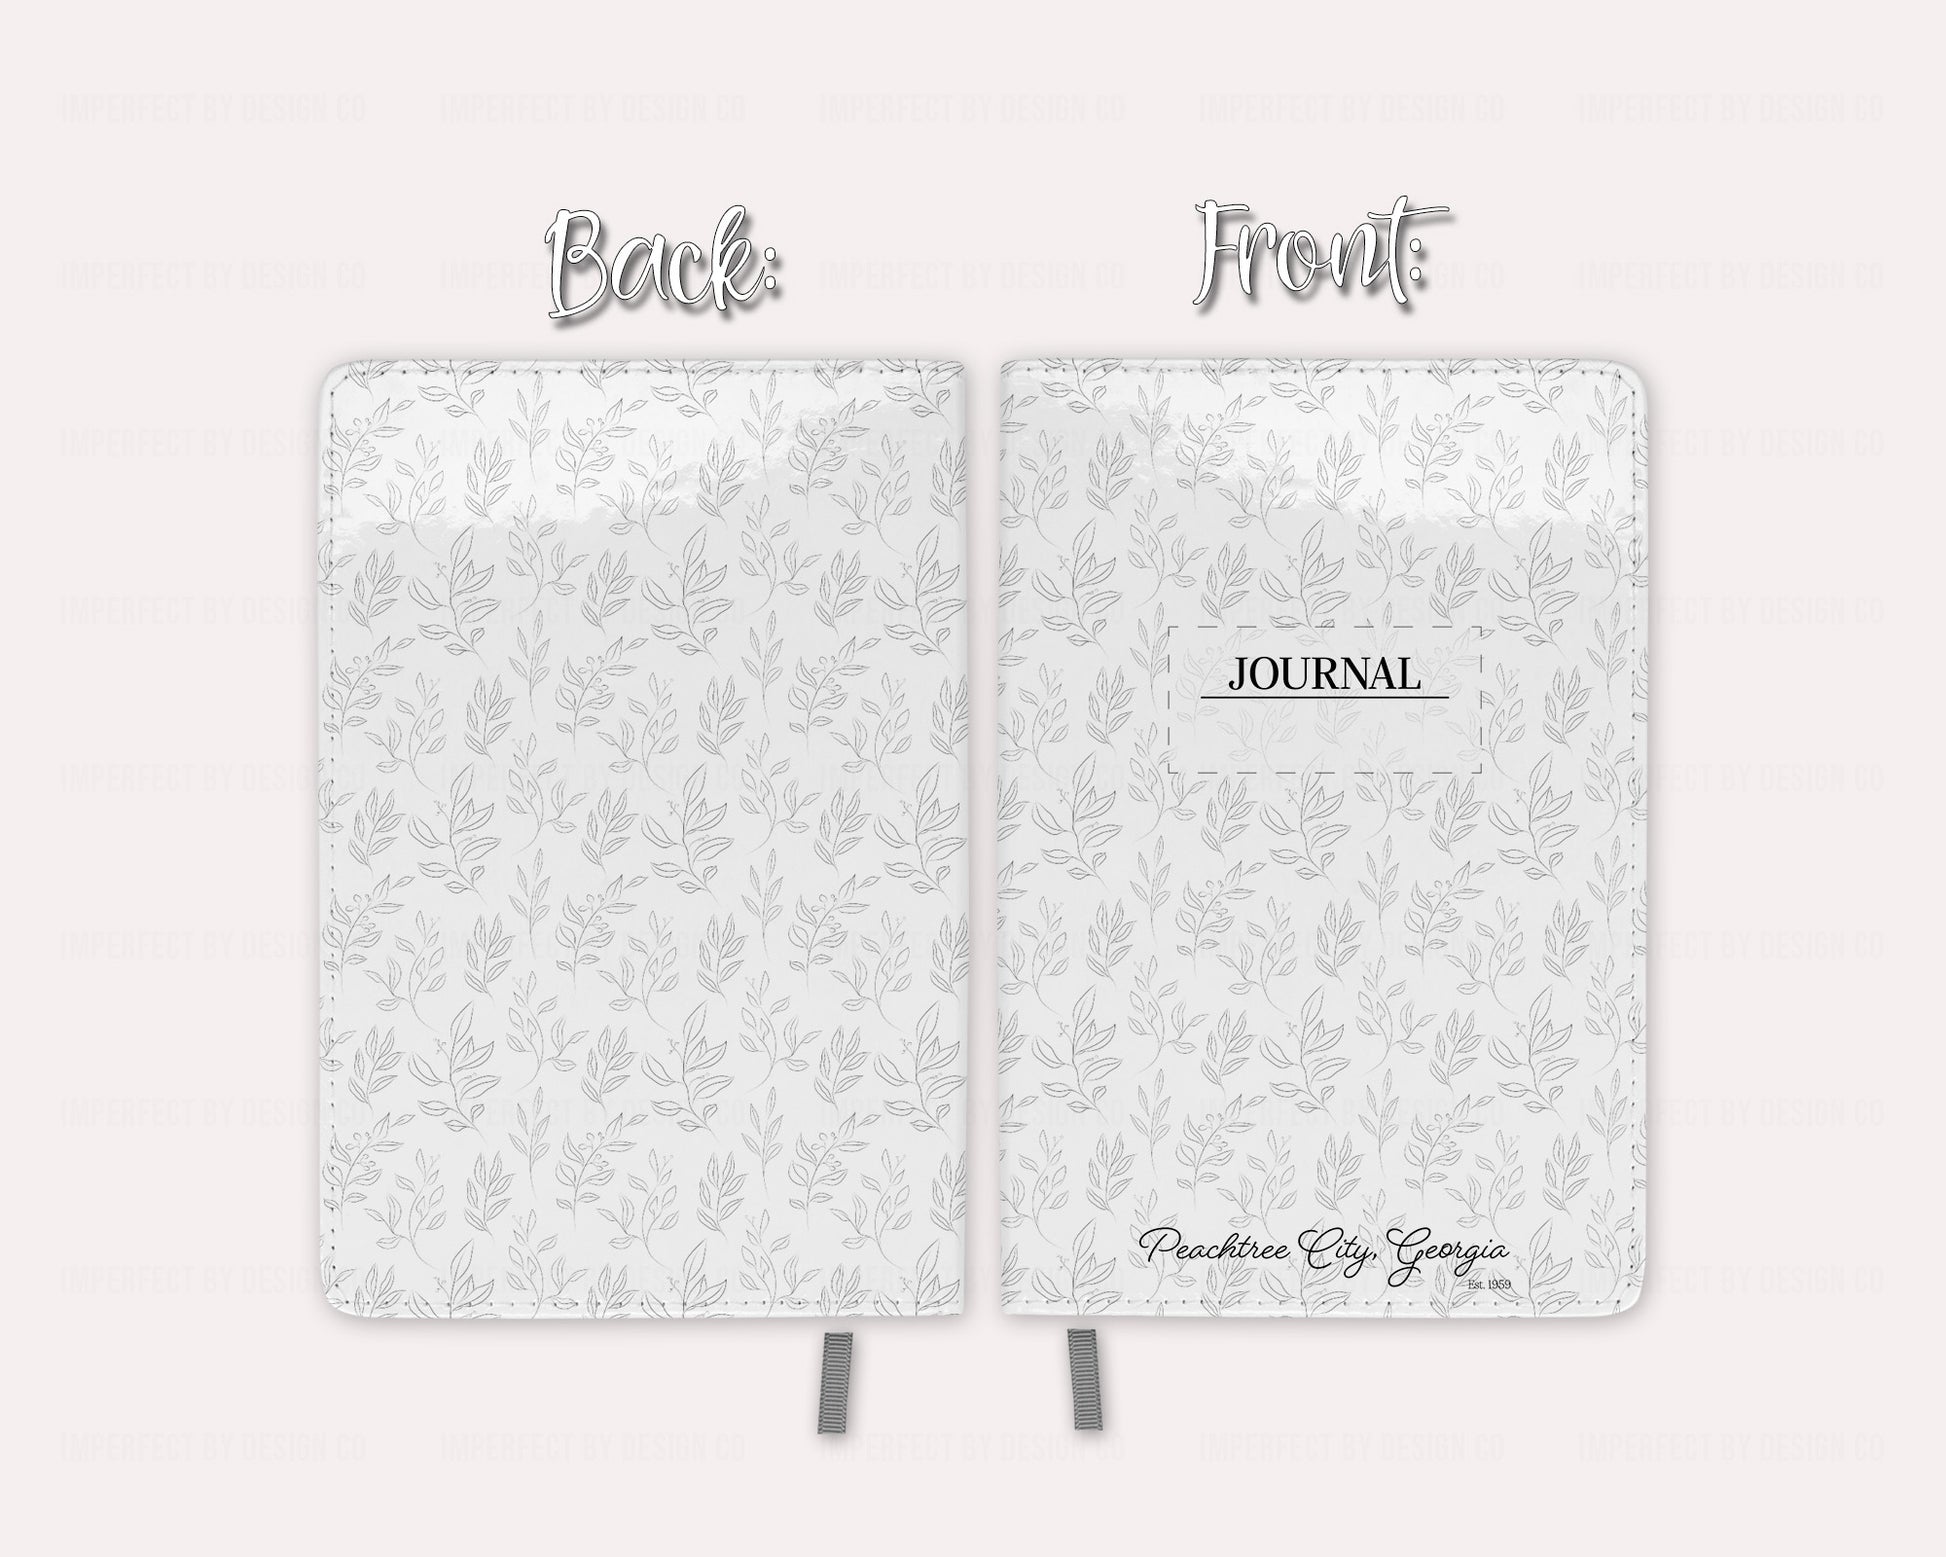 A beautiful notebook/journal with a Peachtree City Georgia design, perfect for taking notes or jotting down your thoughts. | imperfecrt by design co